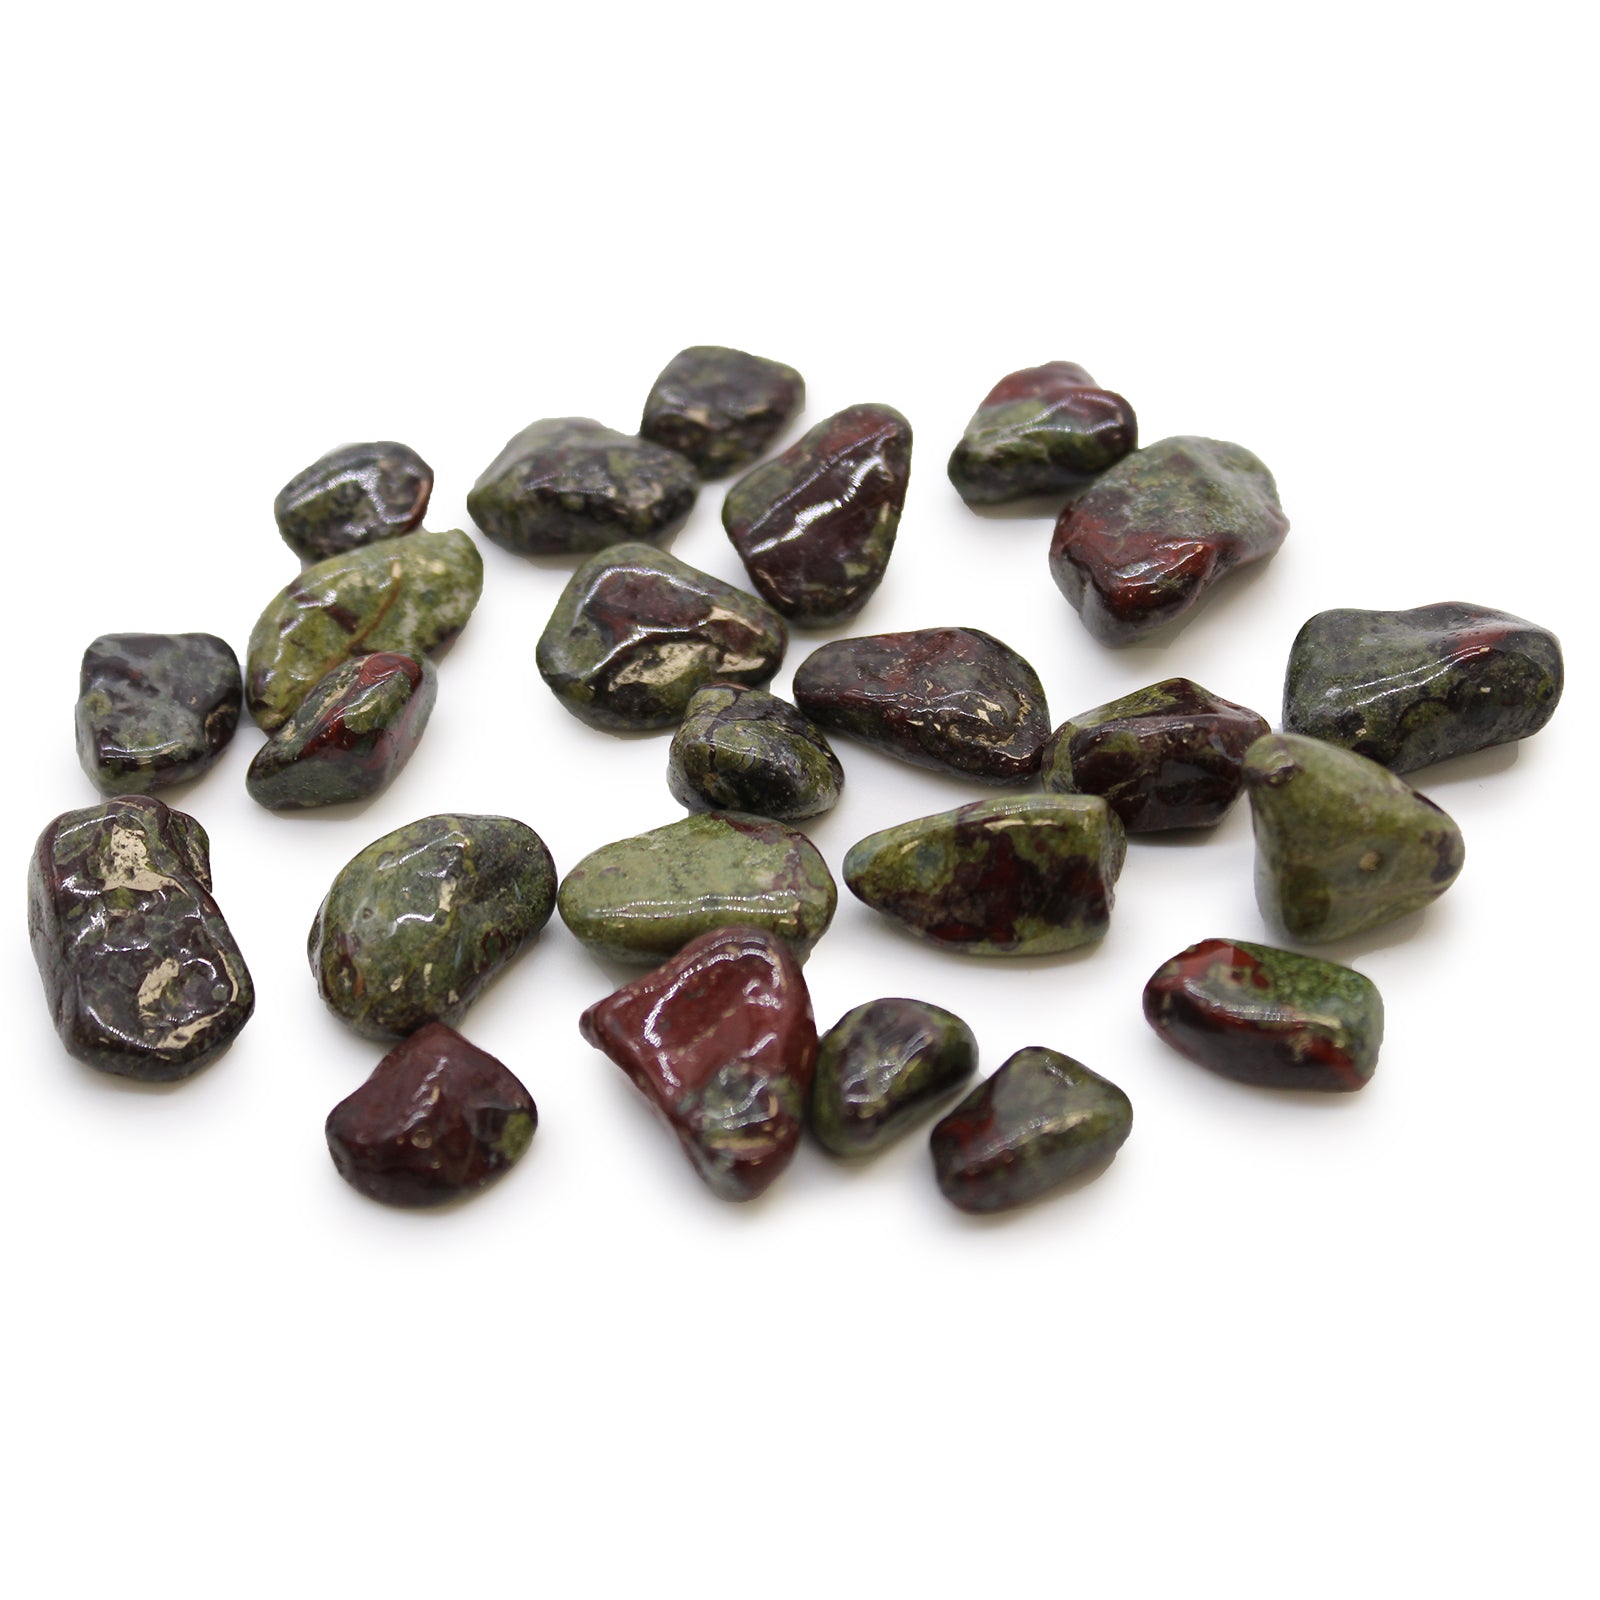 View Small African Tumble Stones Dragon Stones information